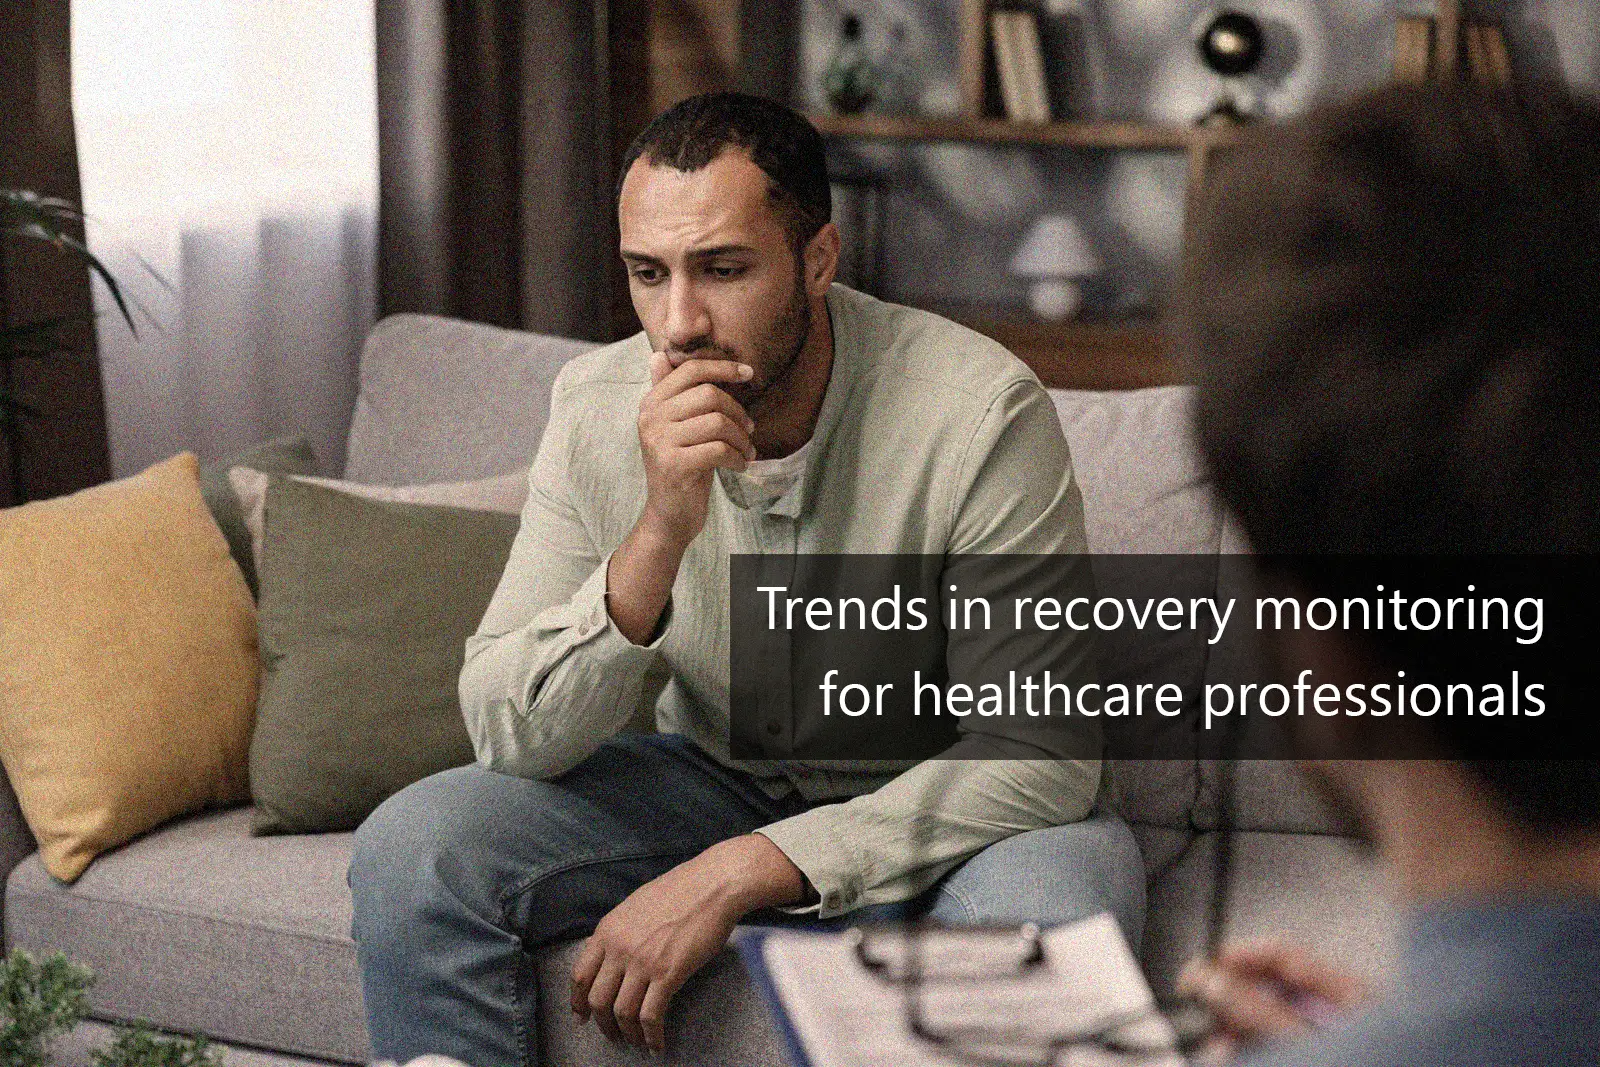 Trends in recovery monitoring for healthcare professionals